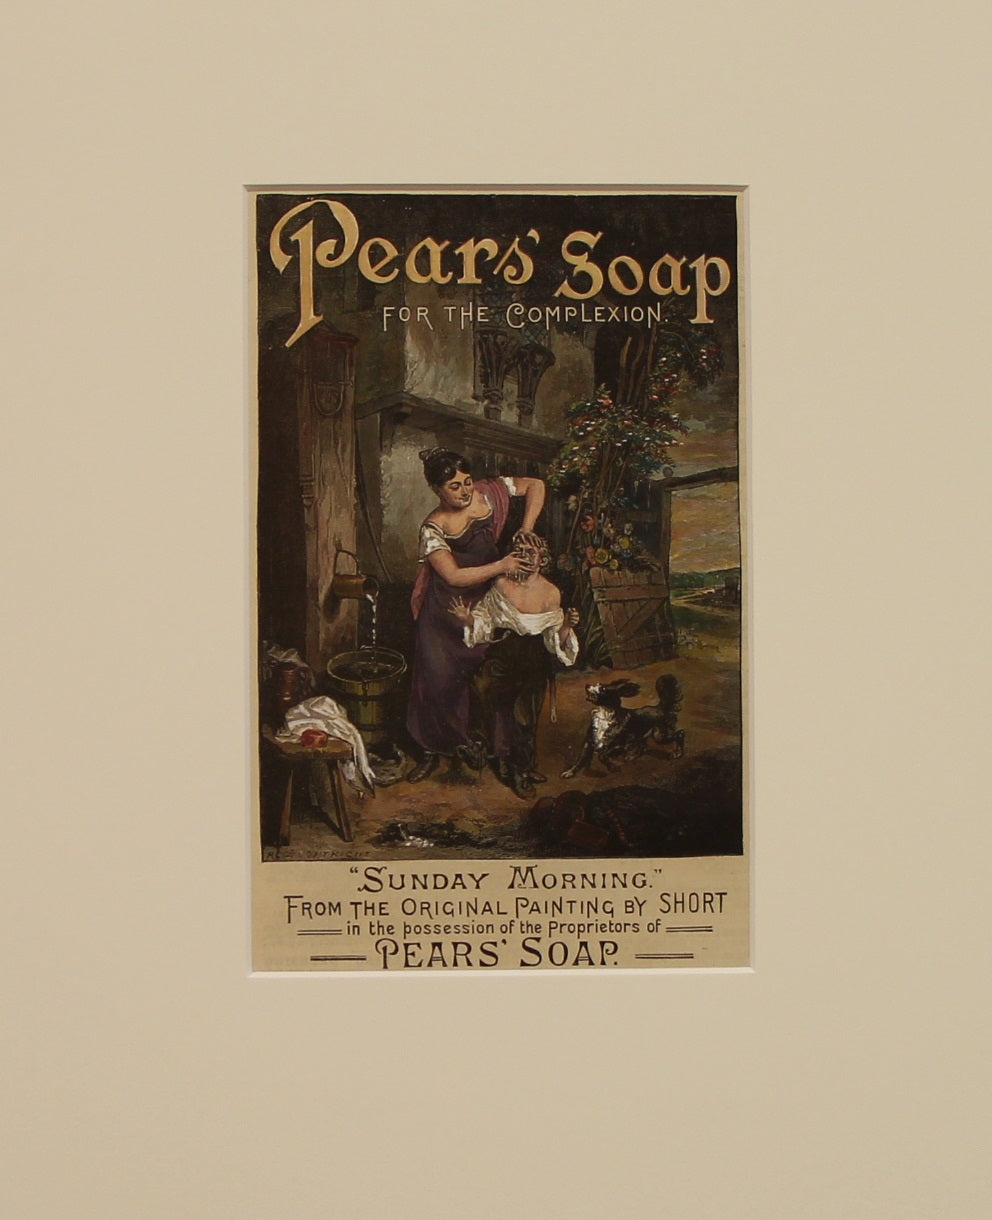 Decorator, Advertising, Pears Soap for the Complexion, From 1869 onwards